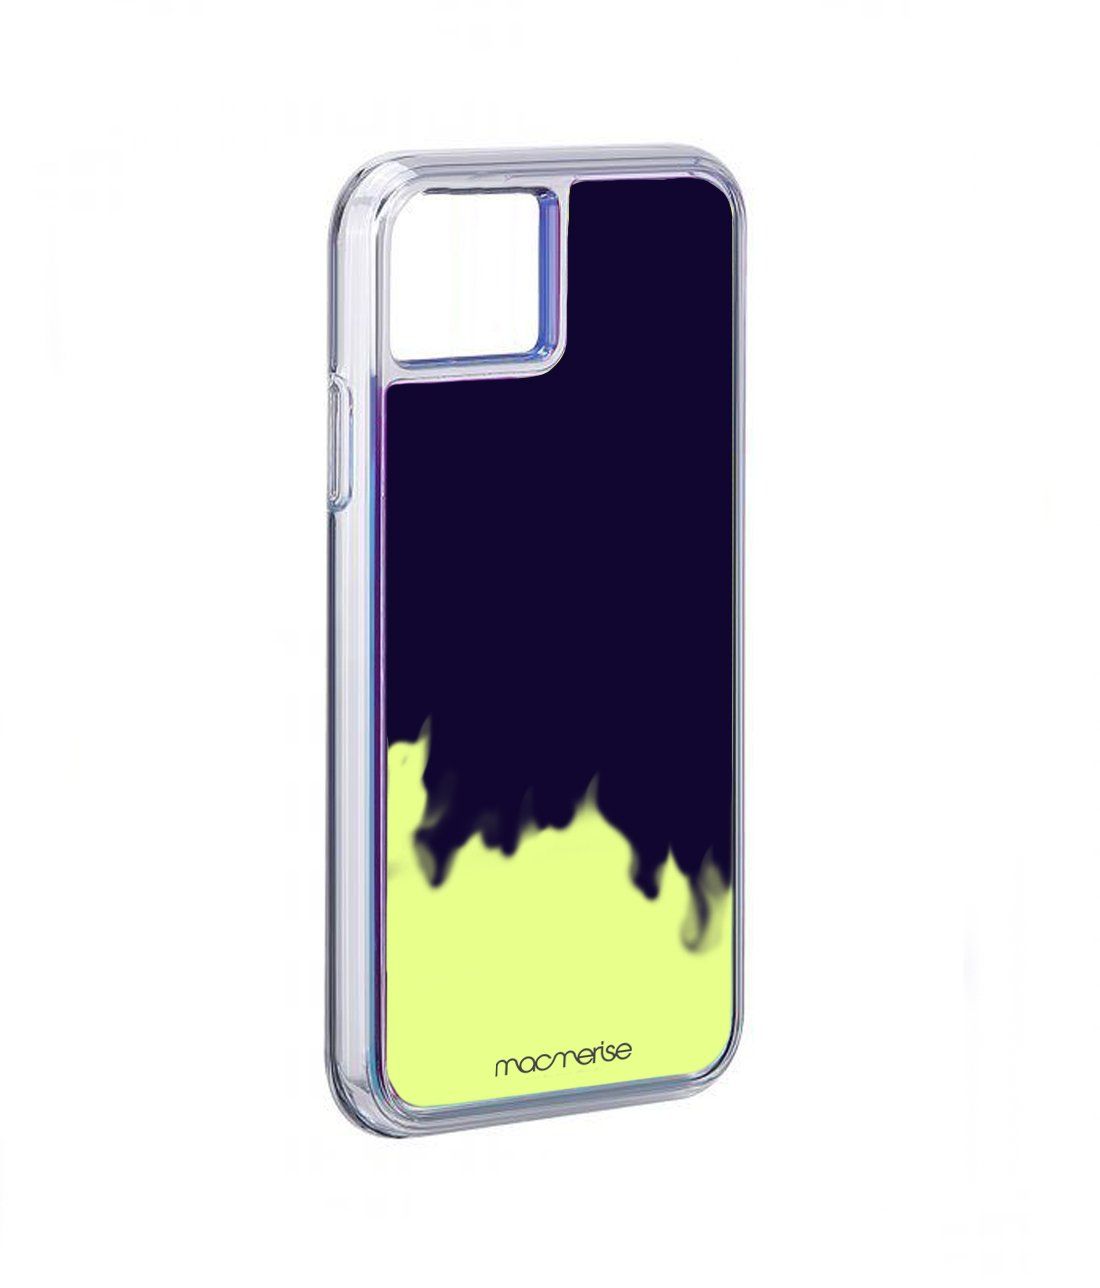 Neon Sand Blue - Neon Sand Phone Case for iPhone 11 Pro Max